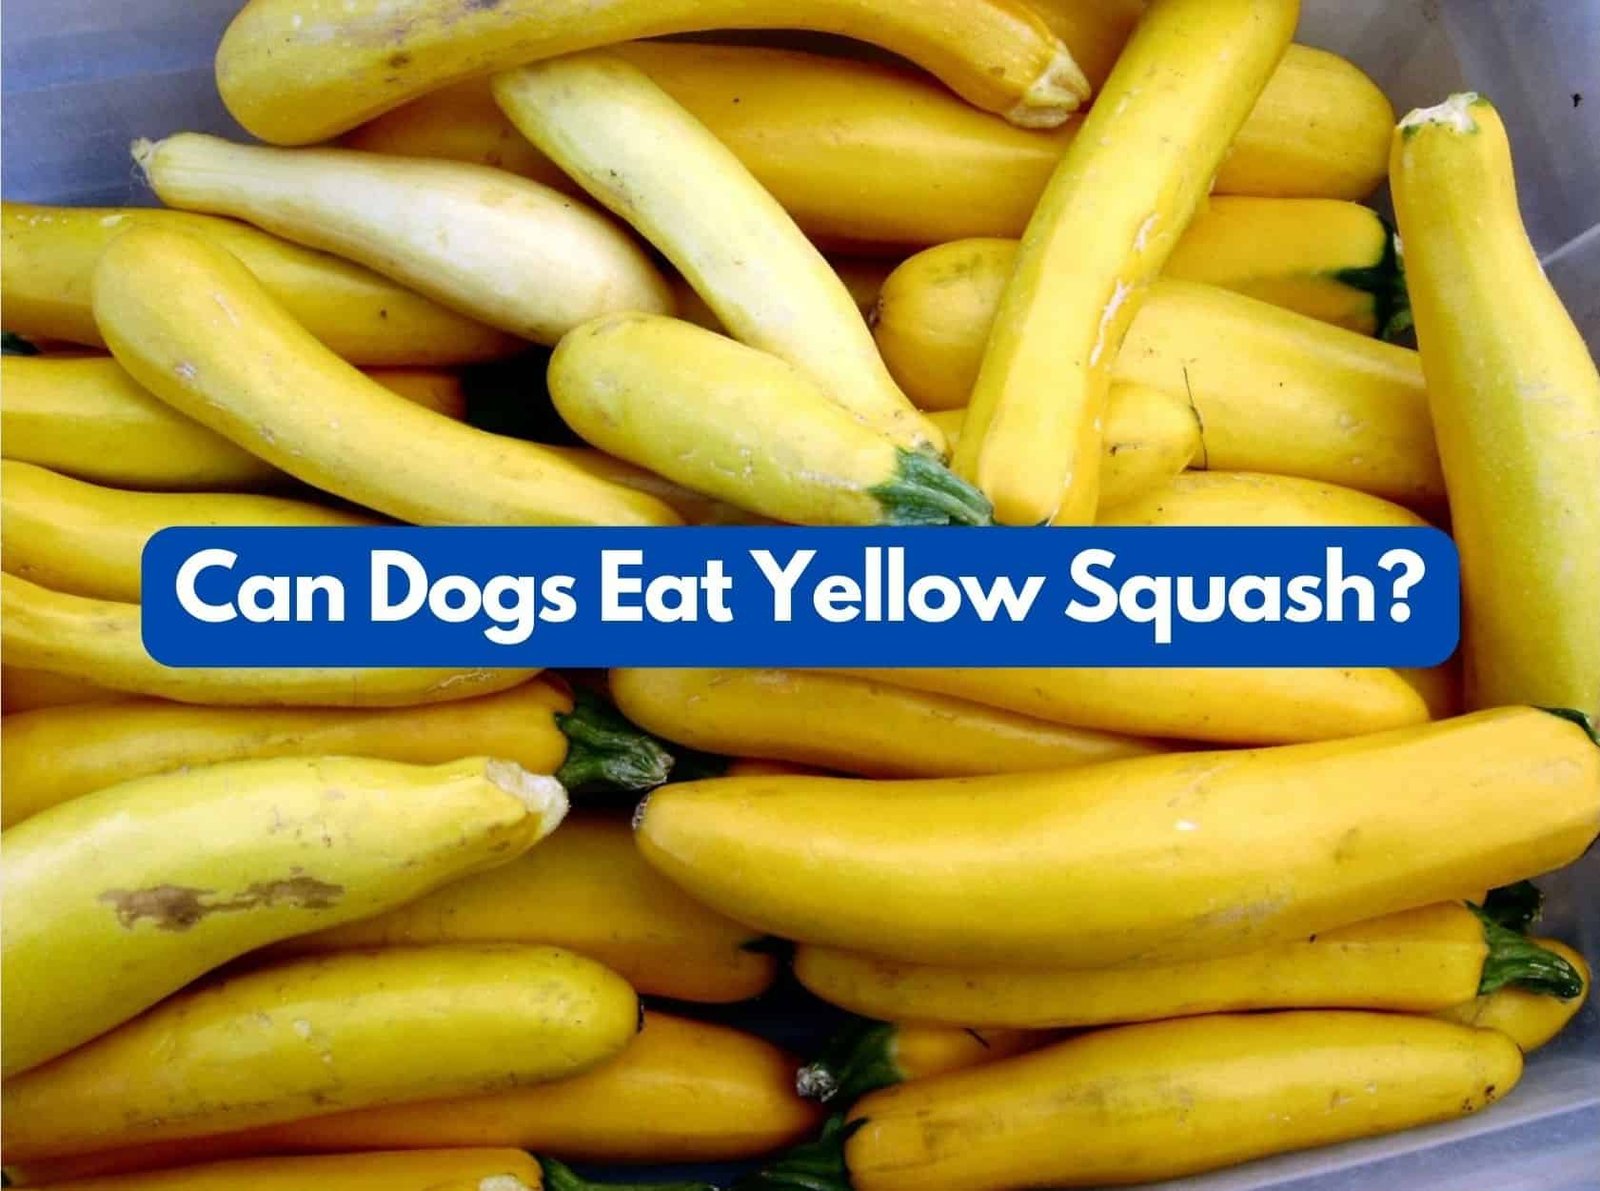 Can my dogs eat yellow squash